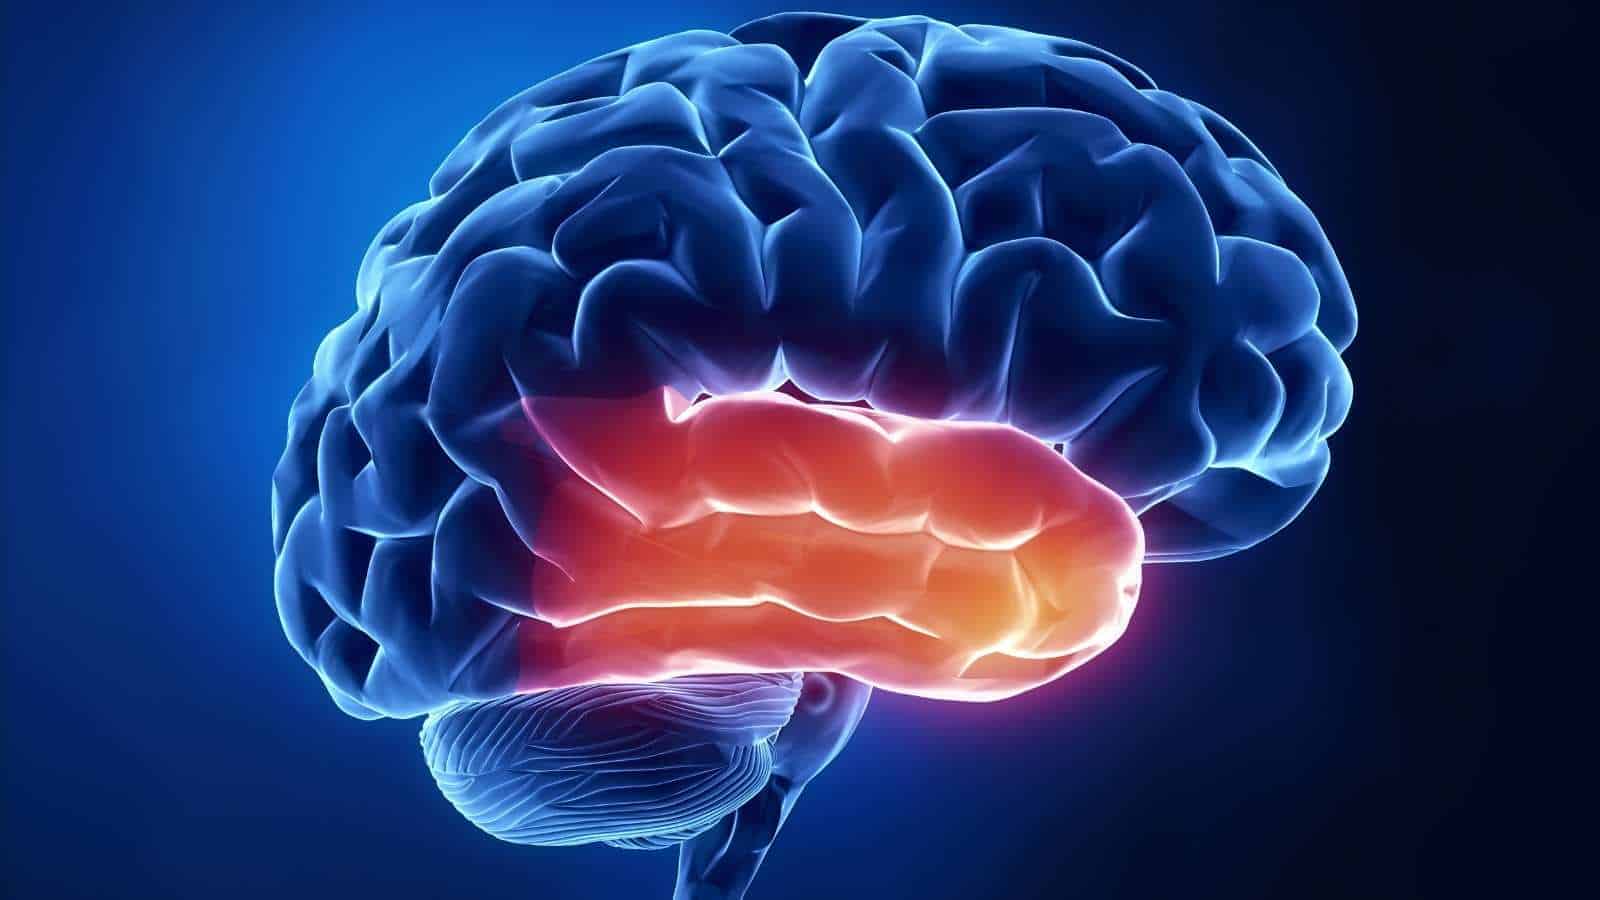 Researchers Find an Amino Acid That May Reduce Epilepsy